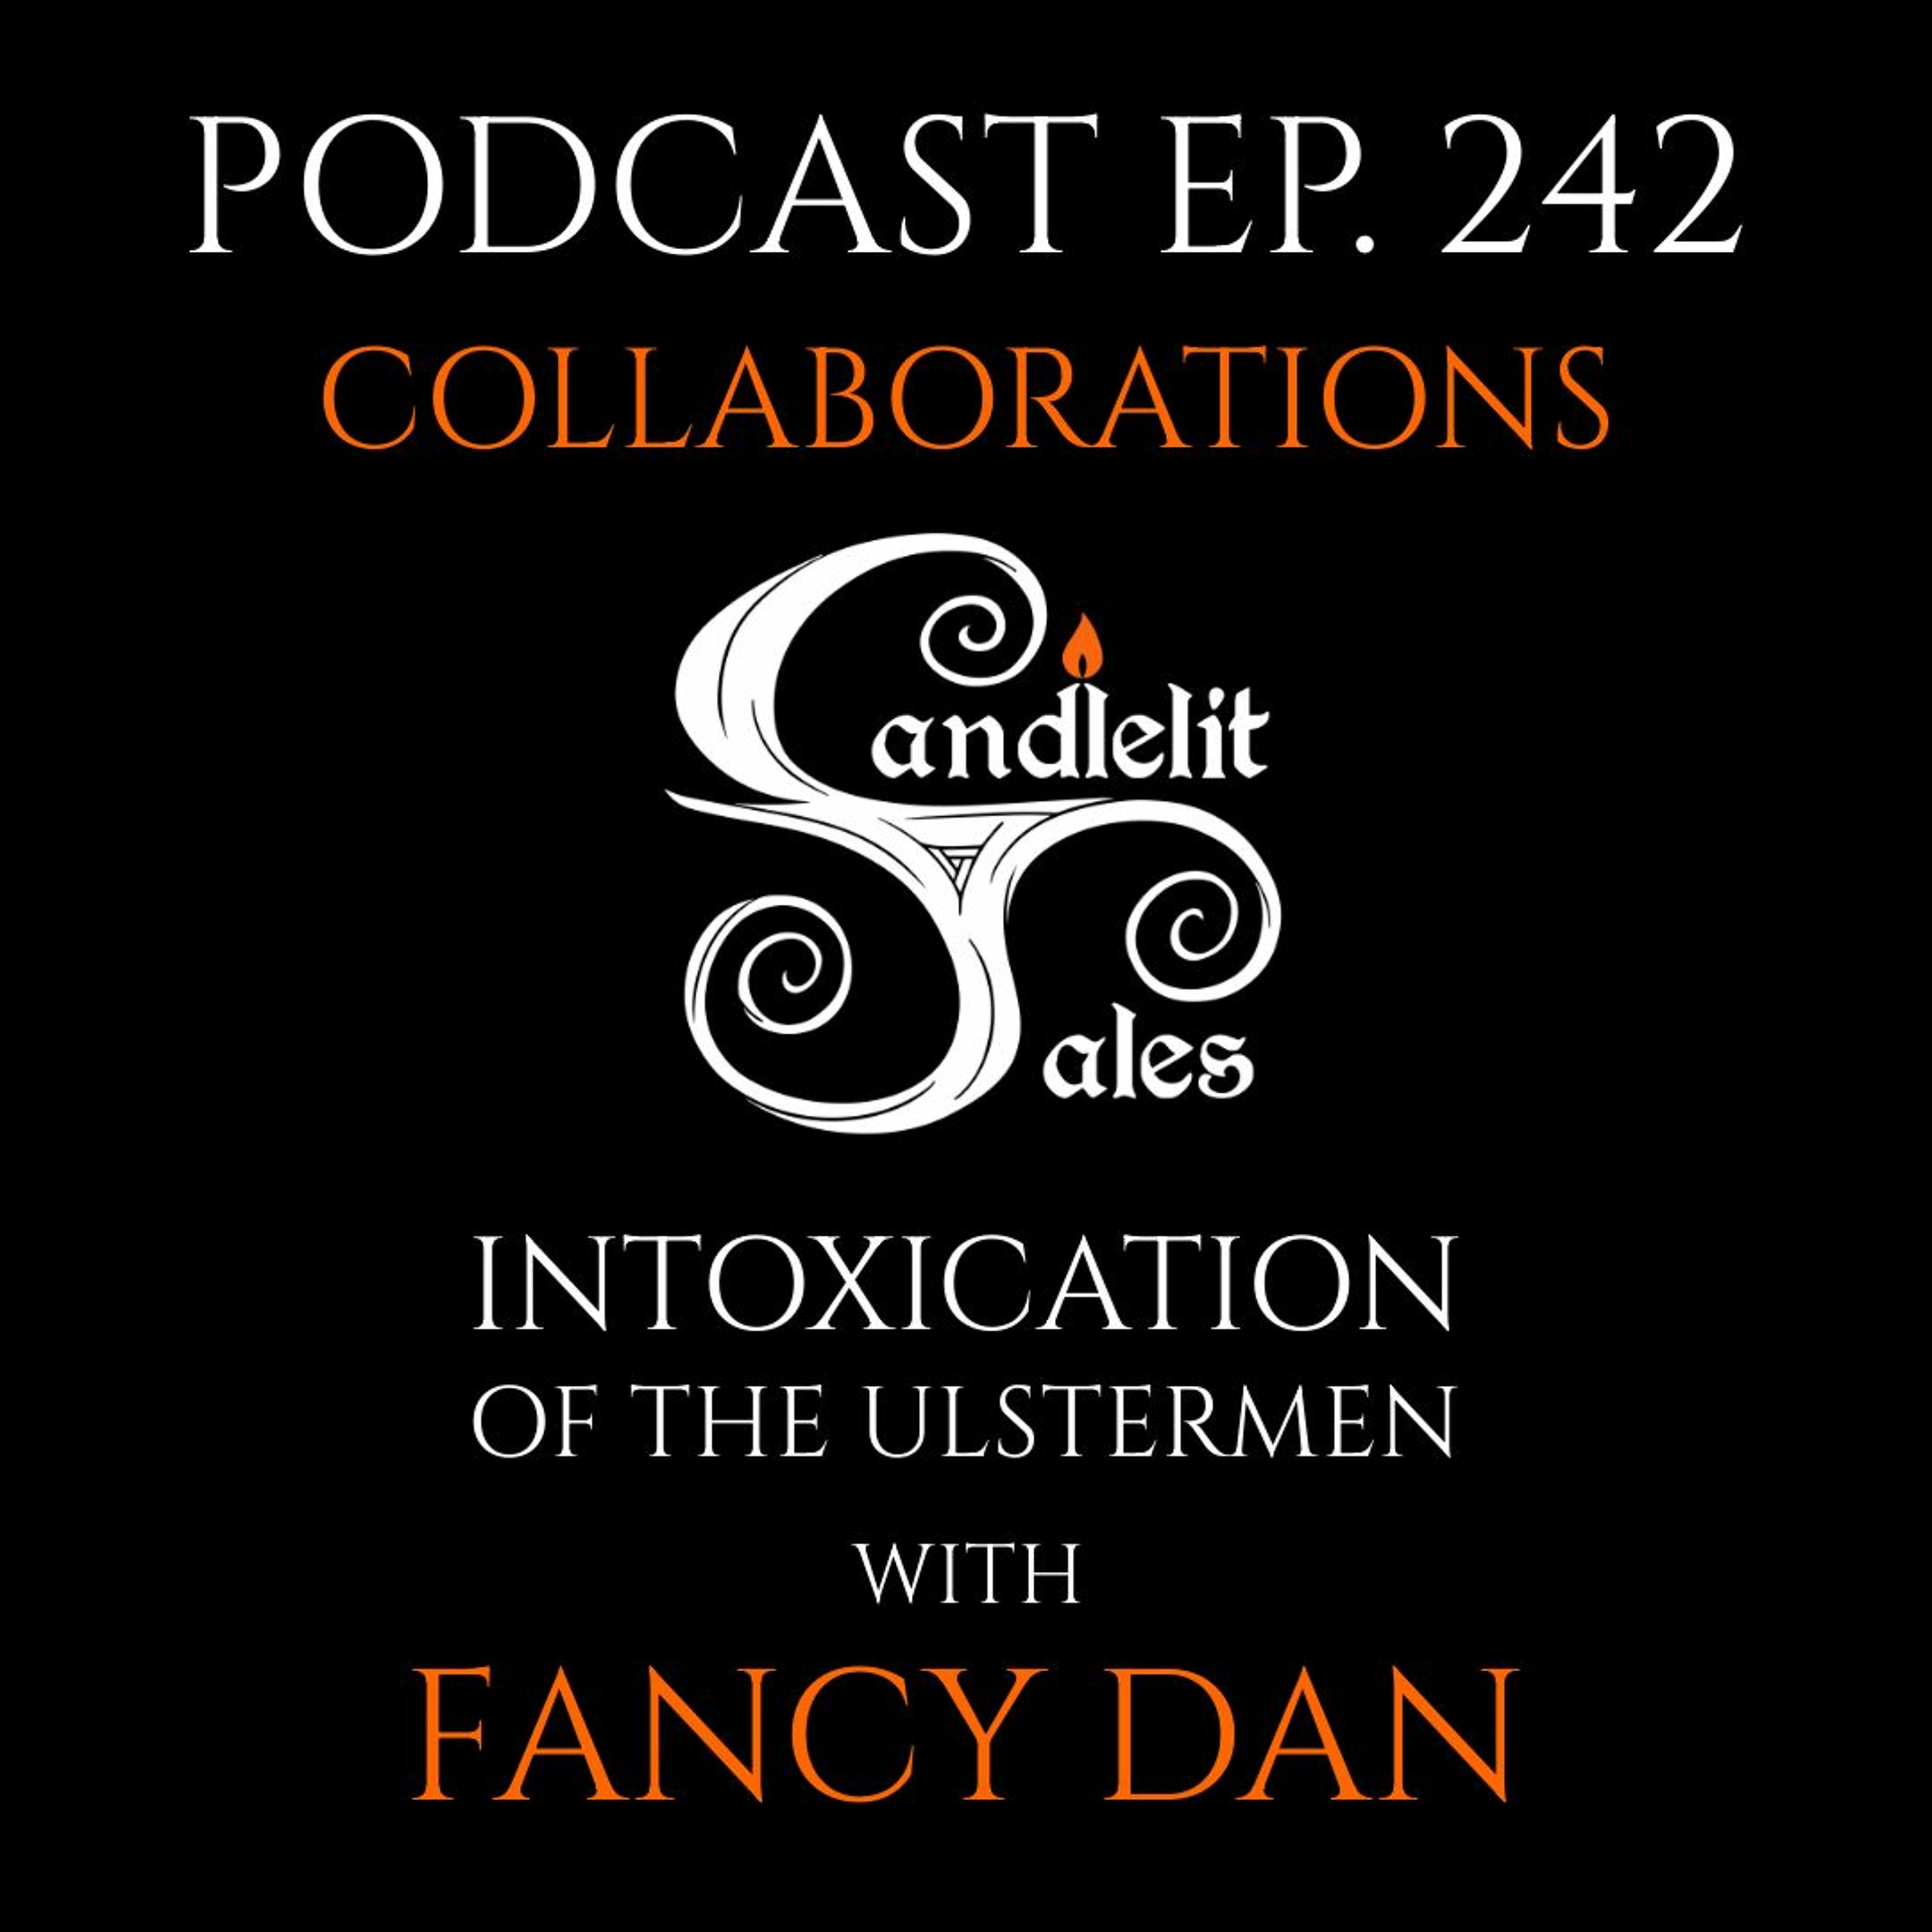 Episode 242 - Collaborations - Intoxication Of The Ulstermen With Fancy Dan